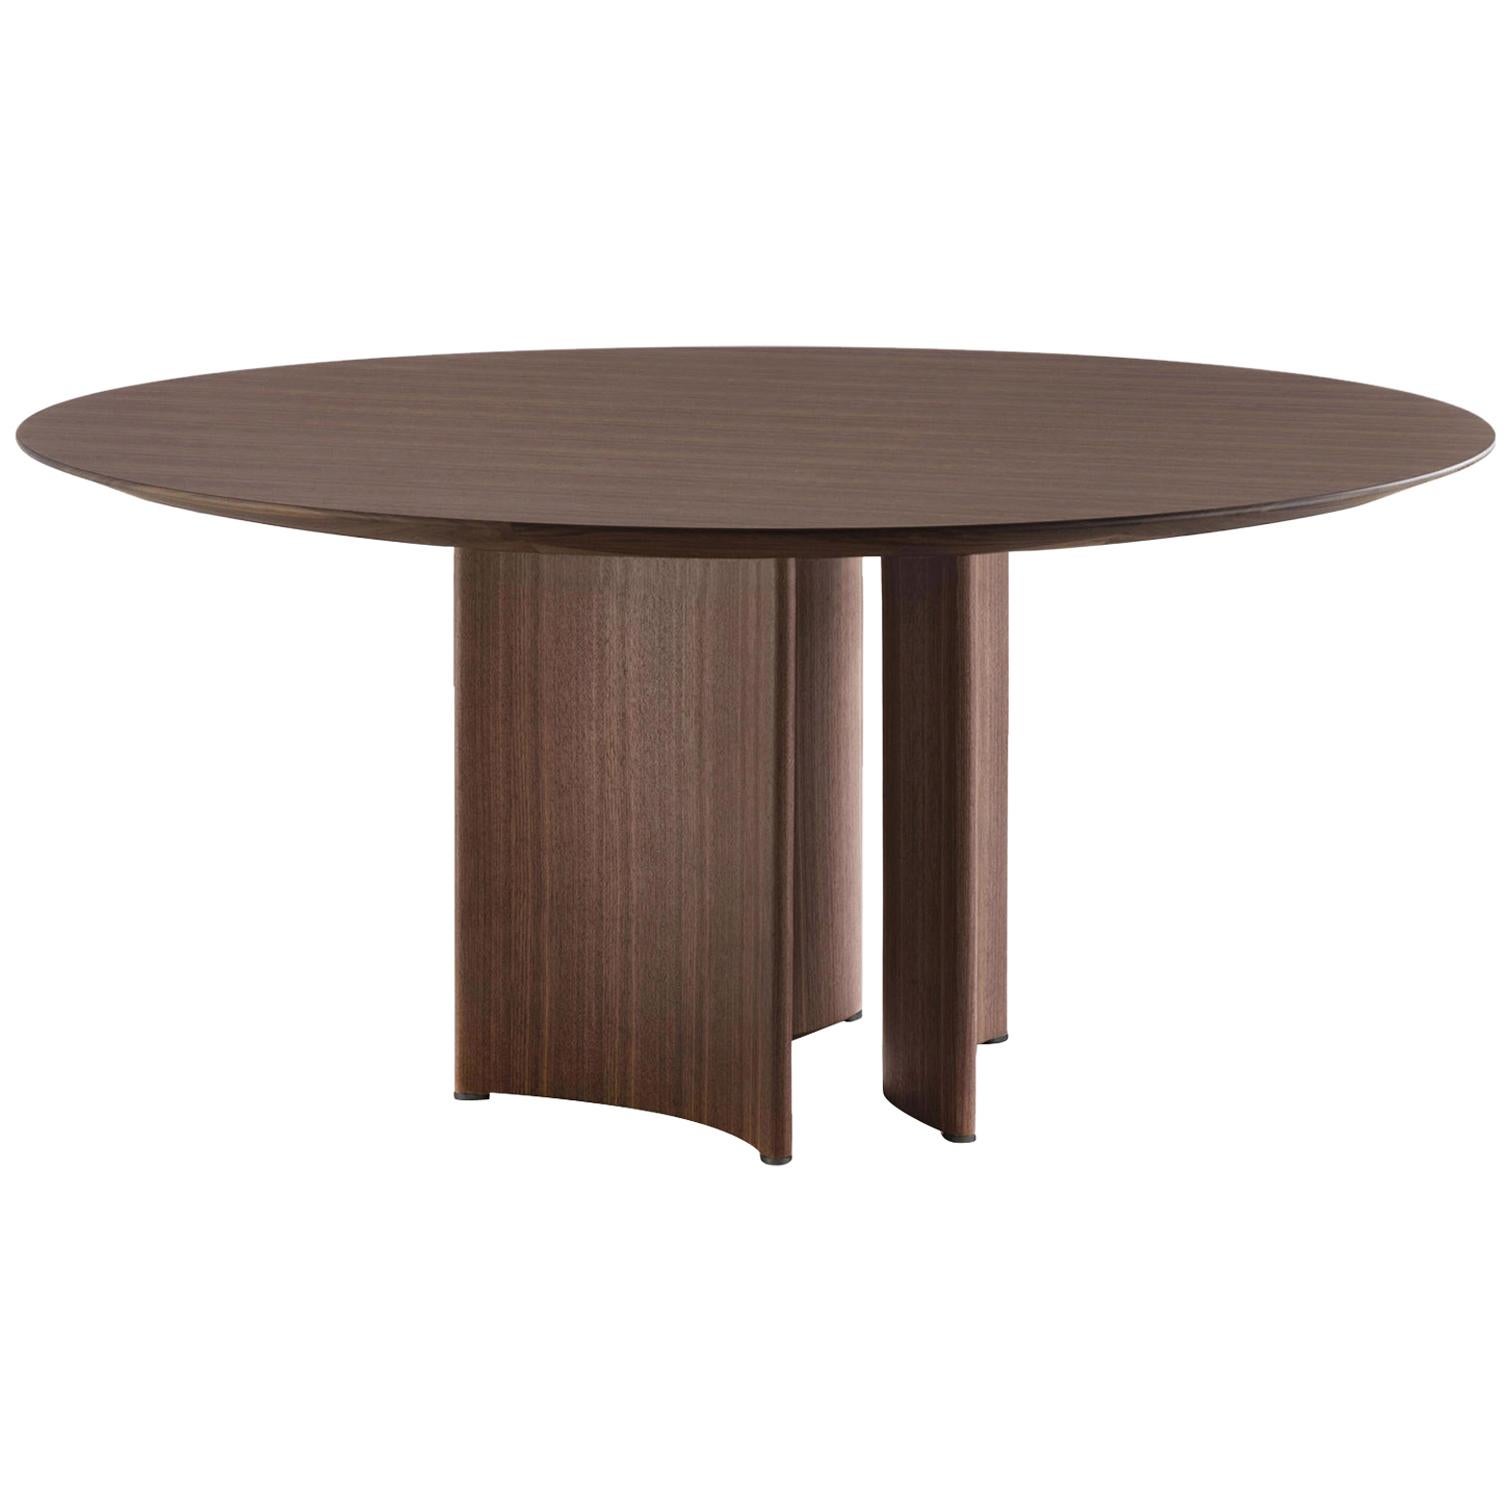 Ornament Dining Table